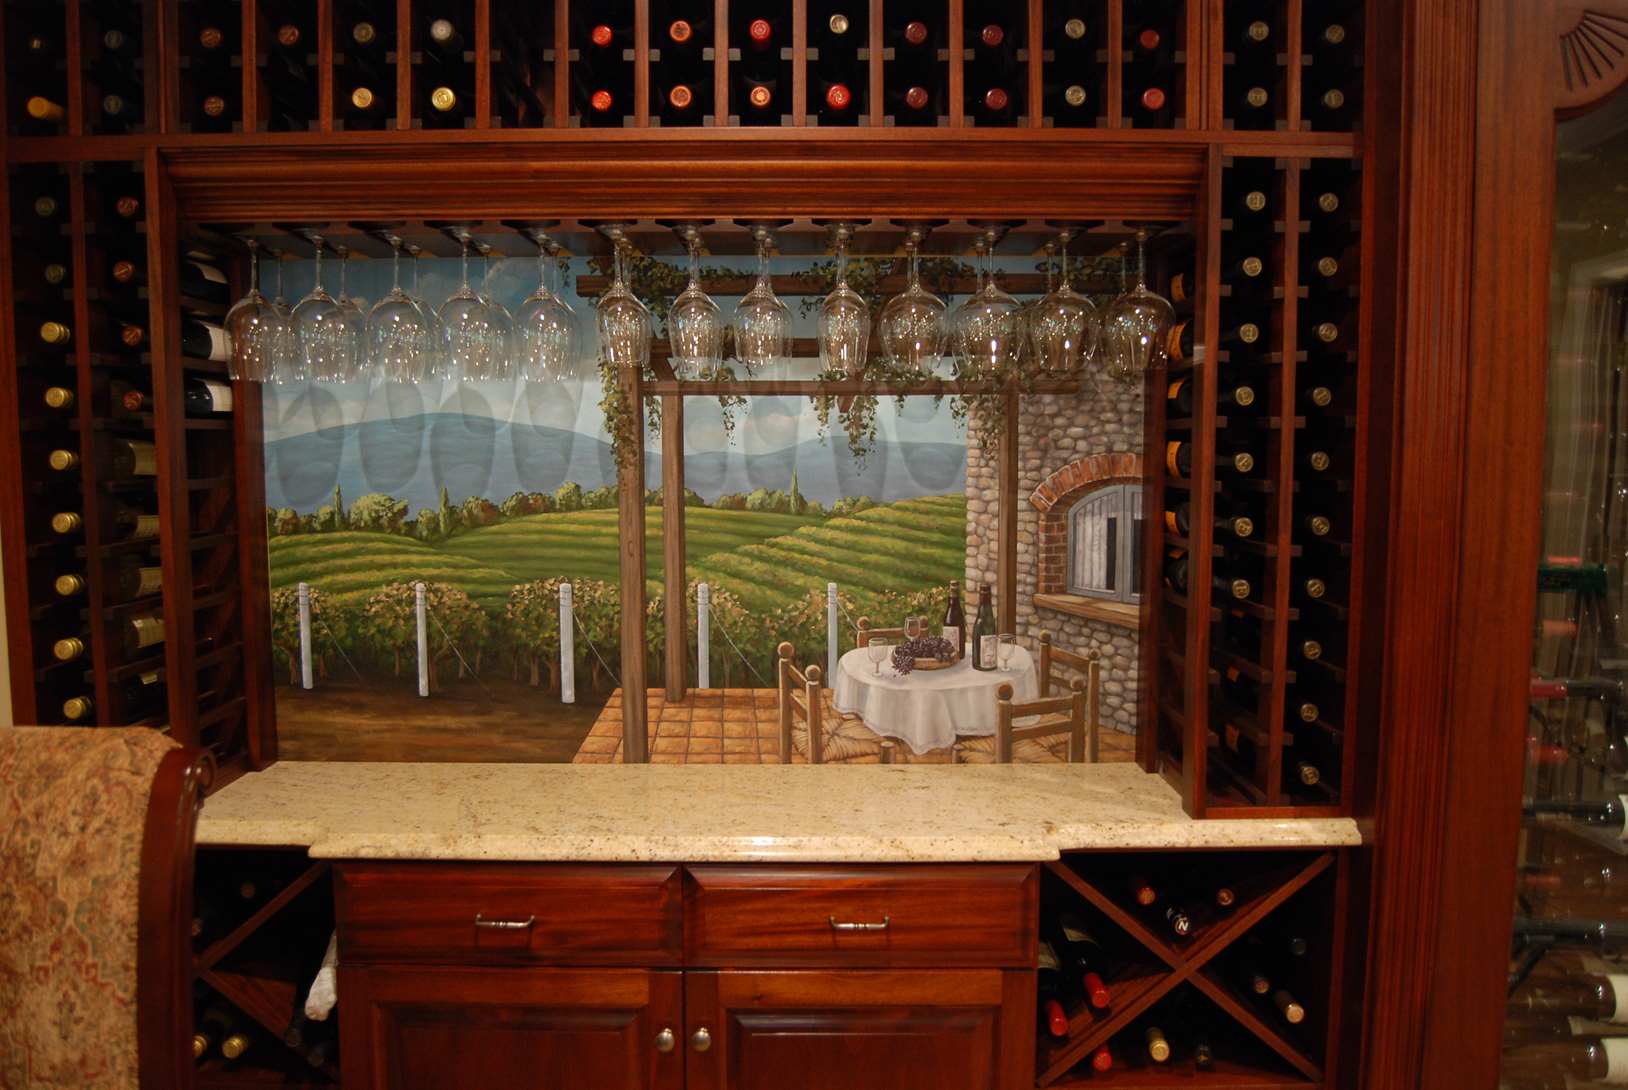 Wine Cellar Wall Window And Vines Mural 2